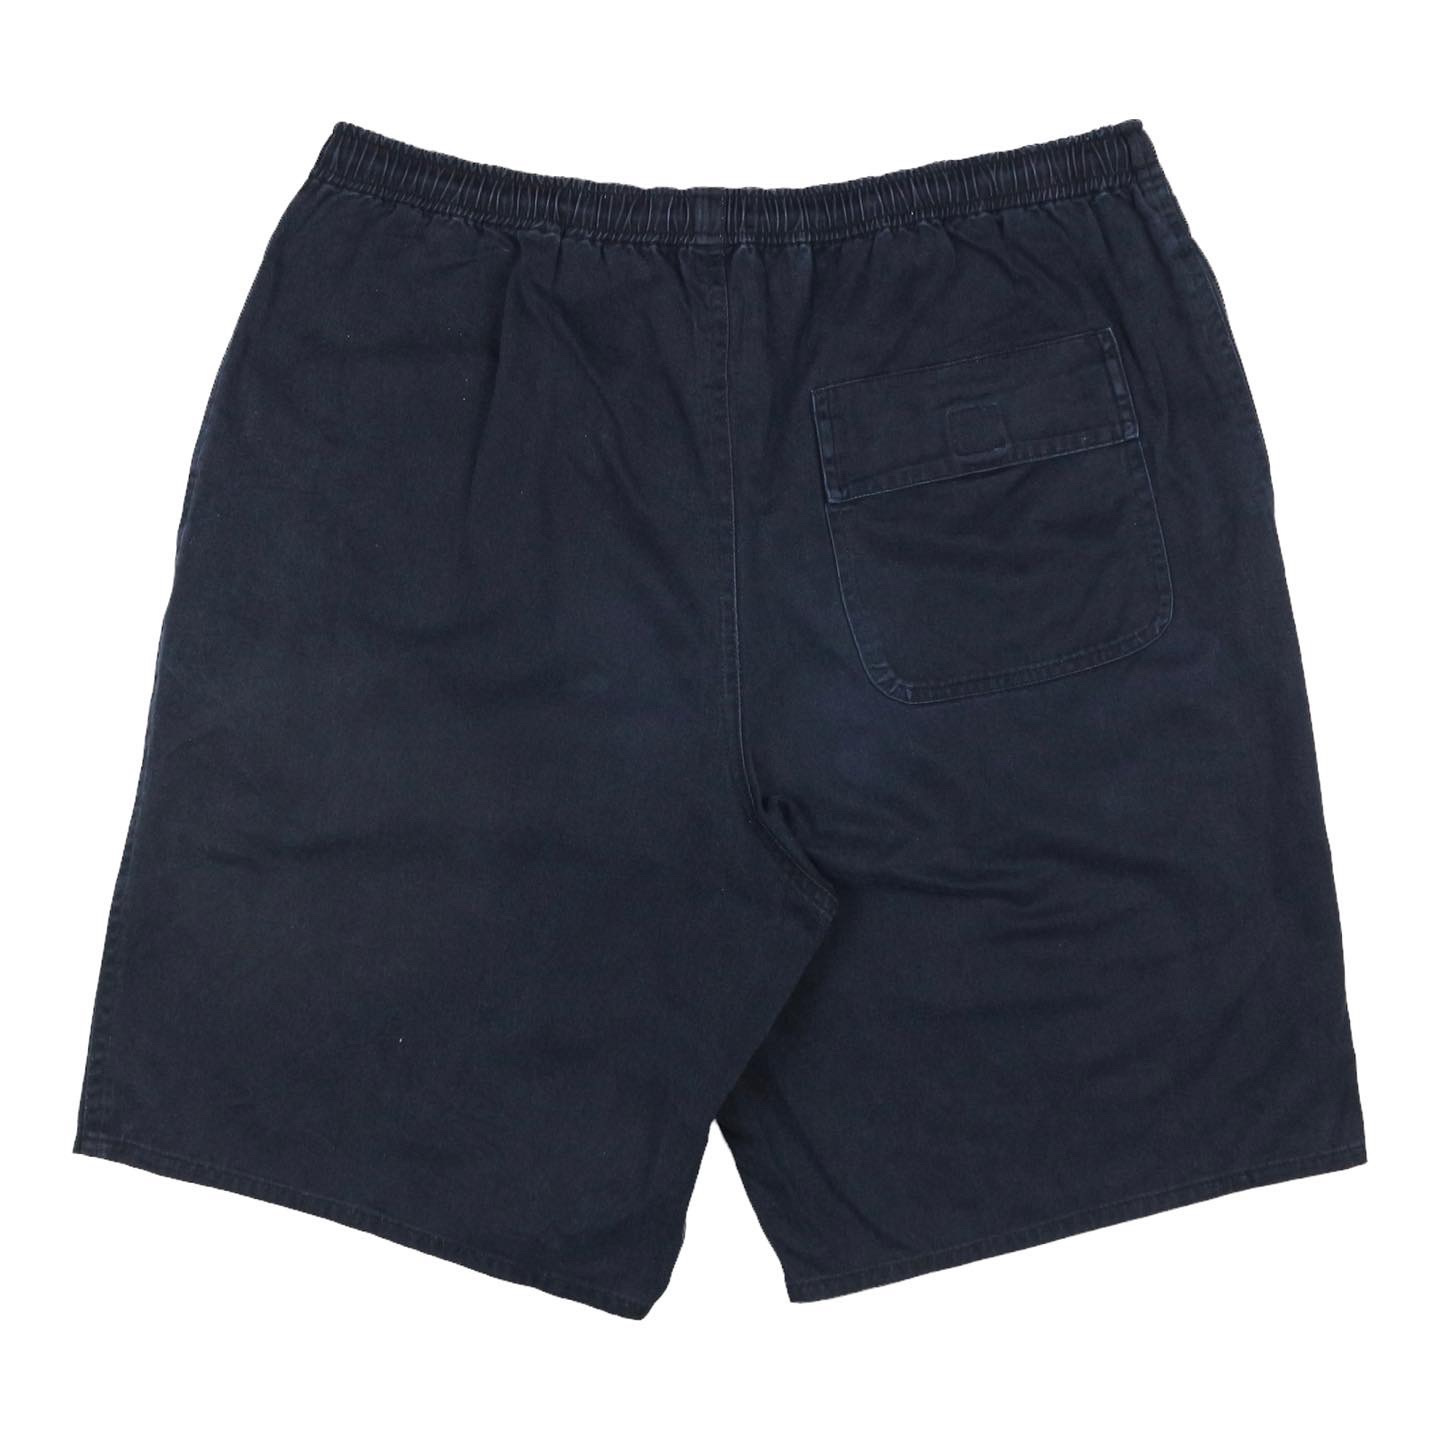 Polo by Ralph Lauren Shorts Size 34-36